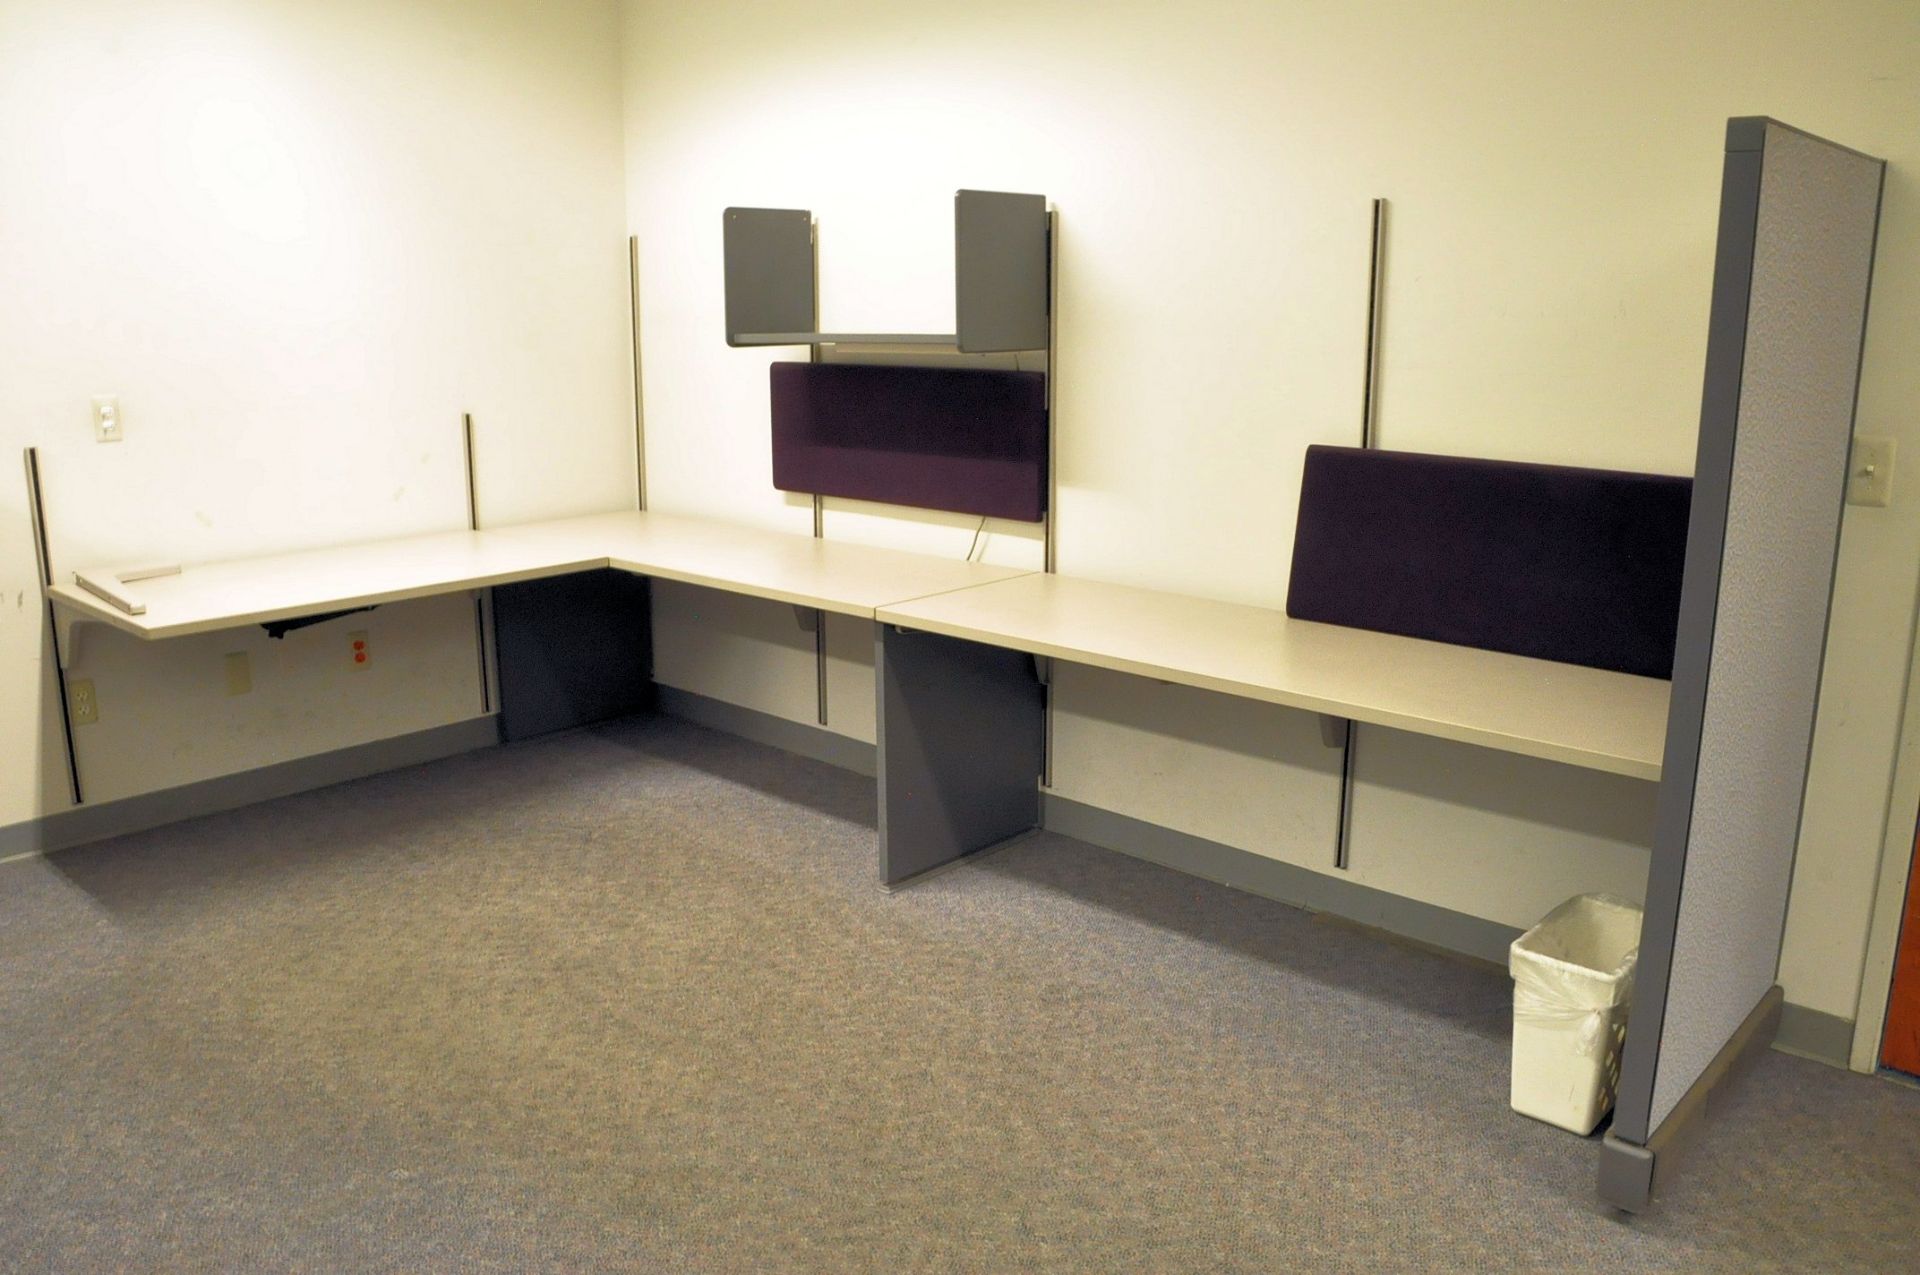 Lot-Cubical Partition Work Systems in (1) Group in (1) Office, - Image 4 of 7